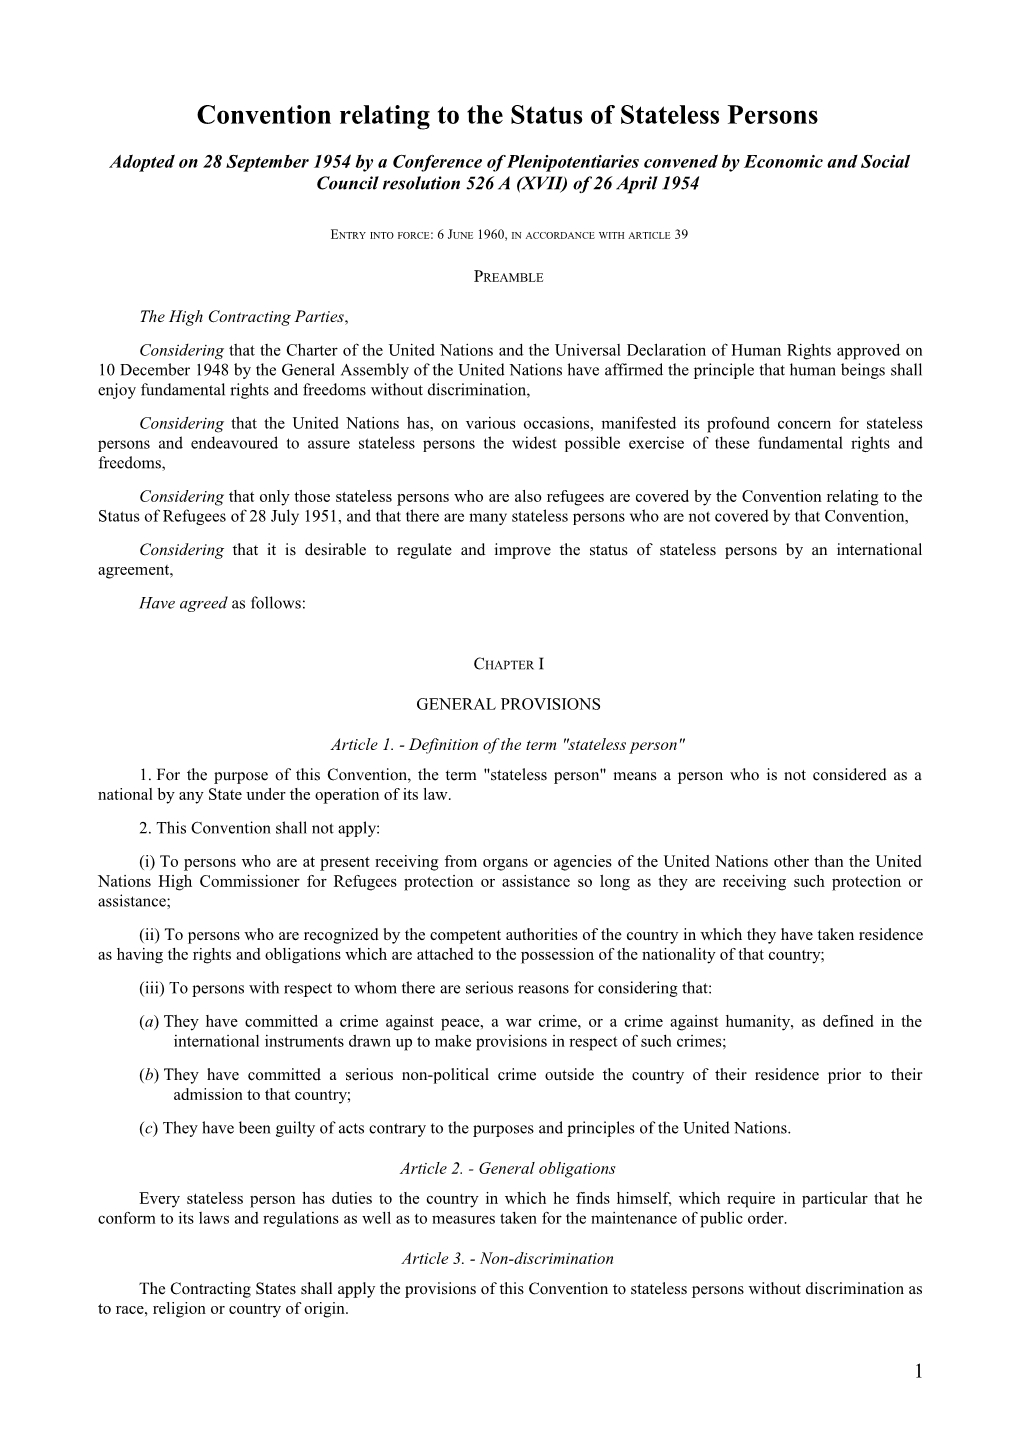 Convention Relating to the Status of Stateless Persons